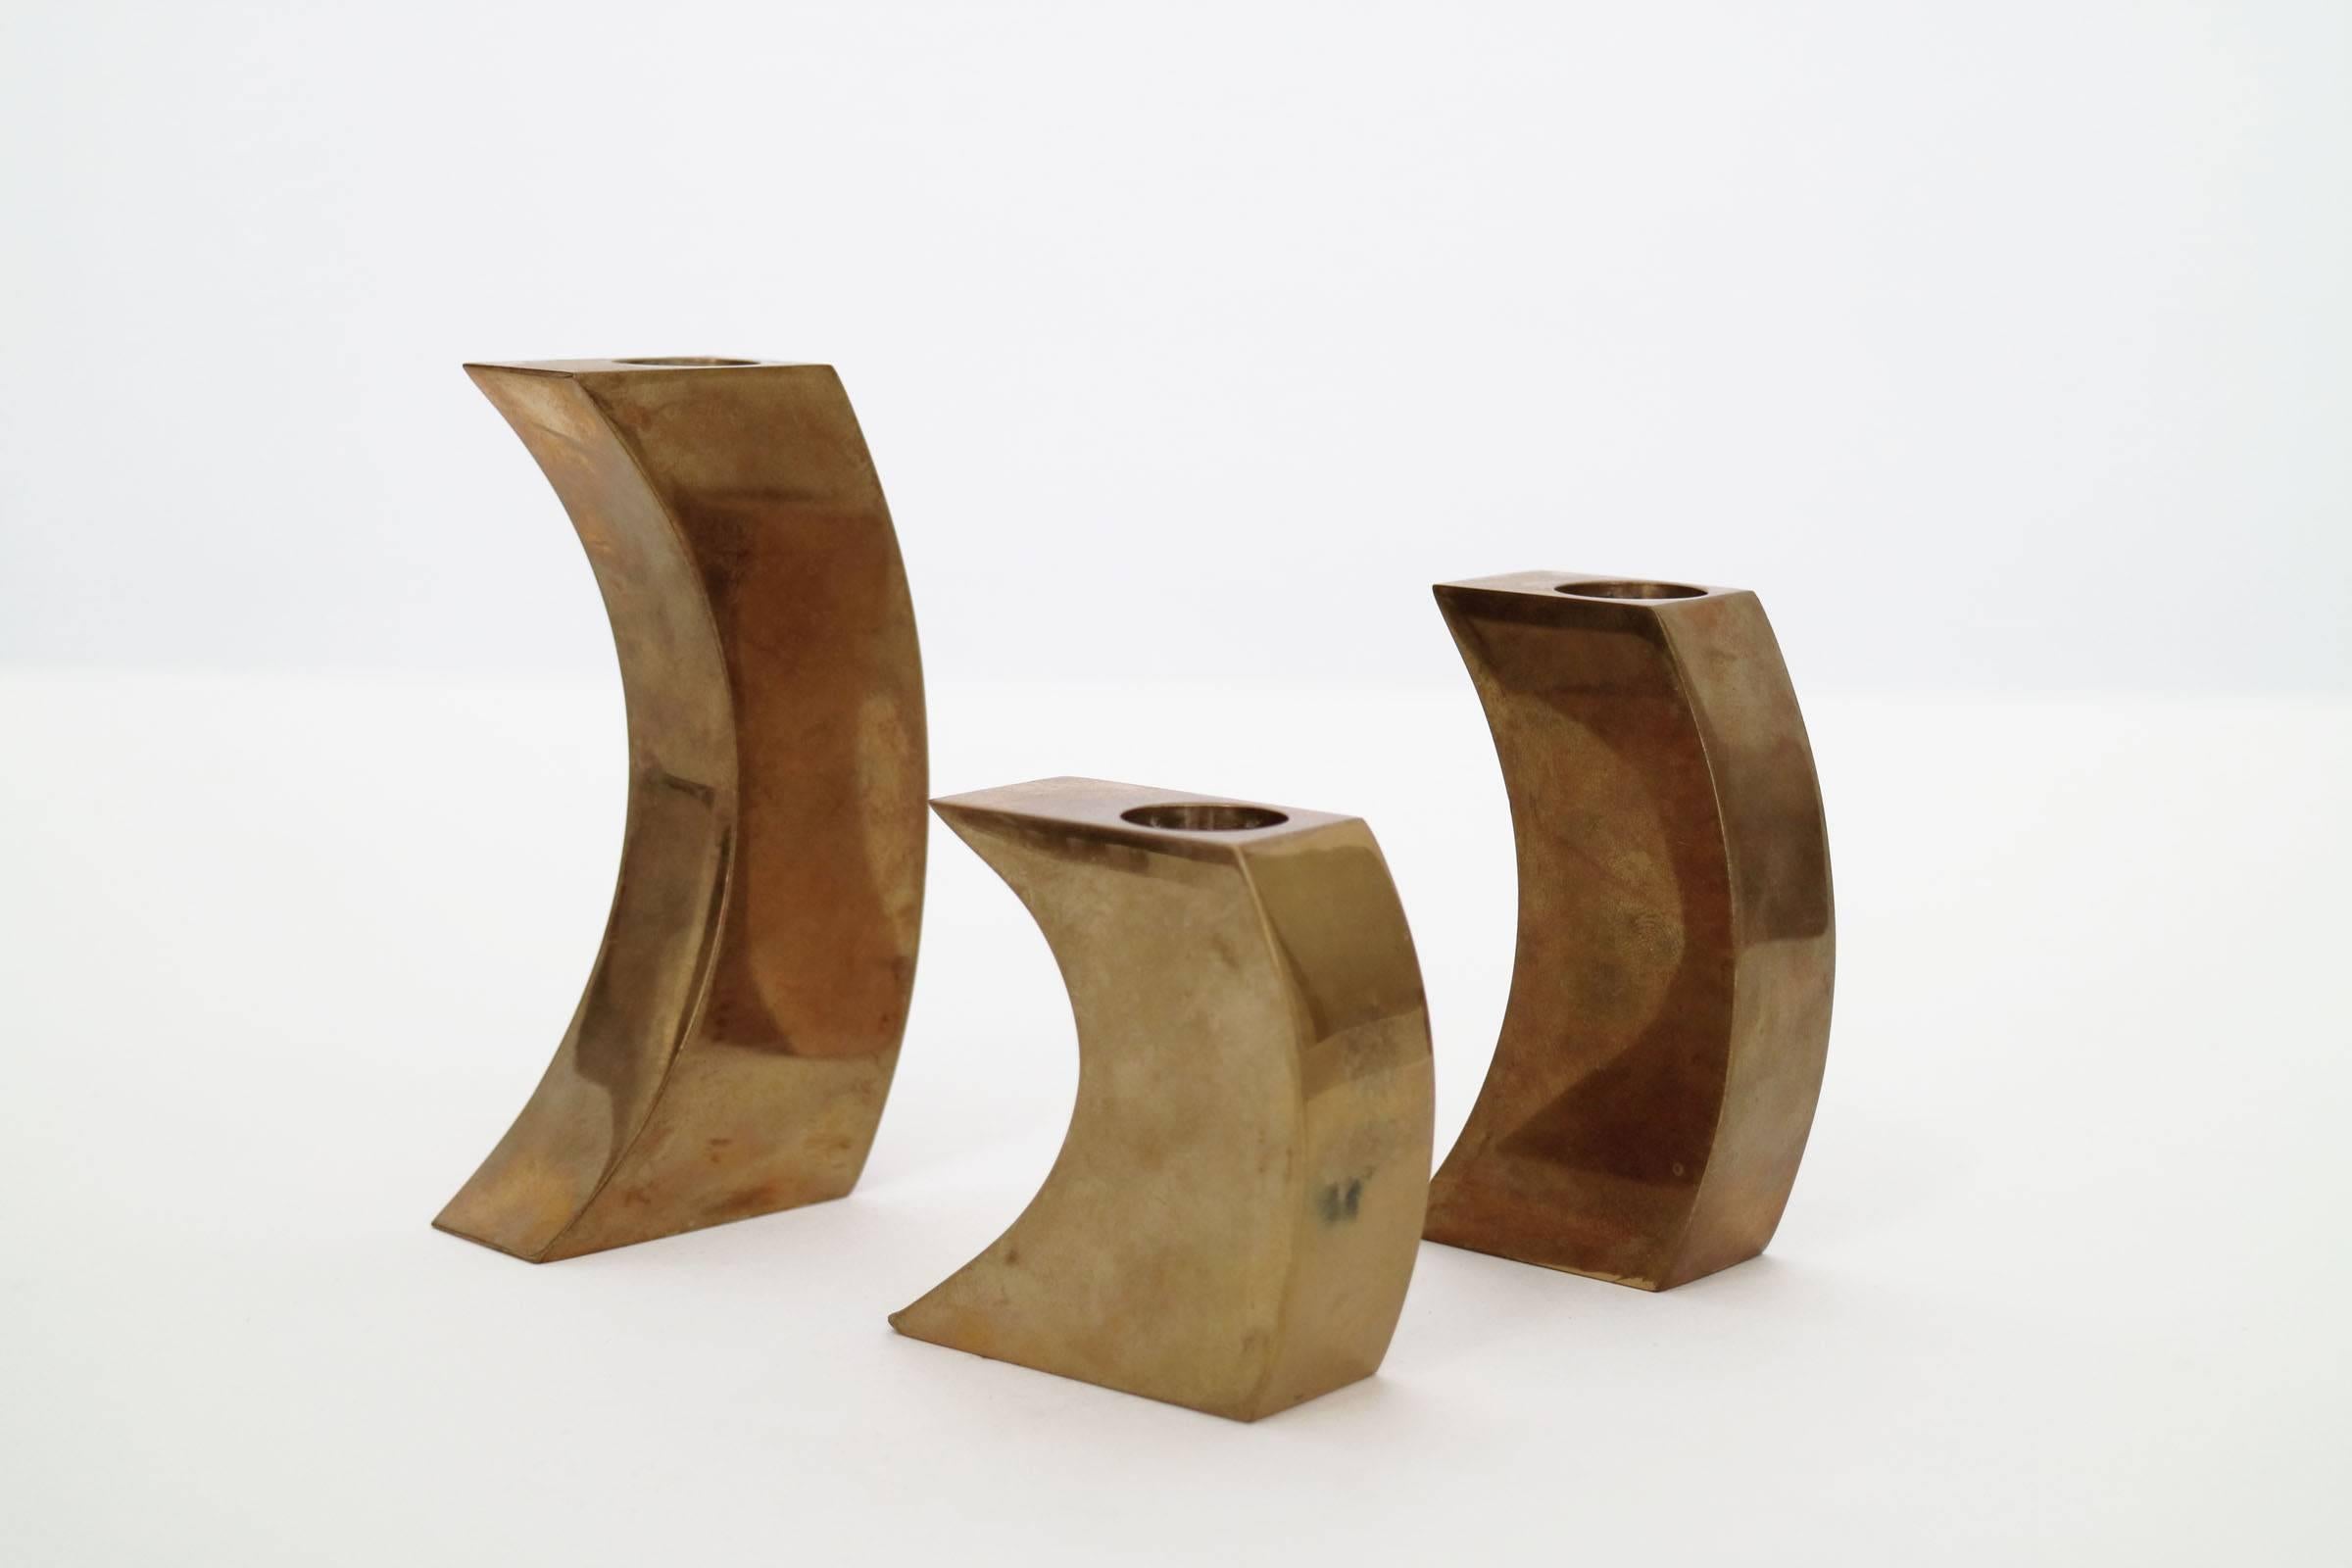 Polished brass crescent like shape, candle holders.

Solid Bronze Candle Holders;

Medium sized candle holder dimensions
H: 3.75